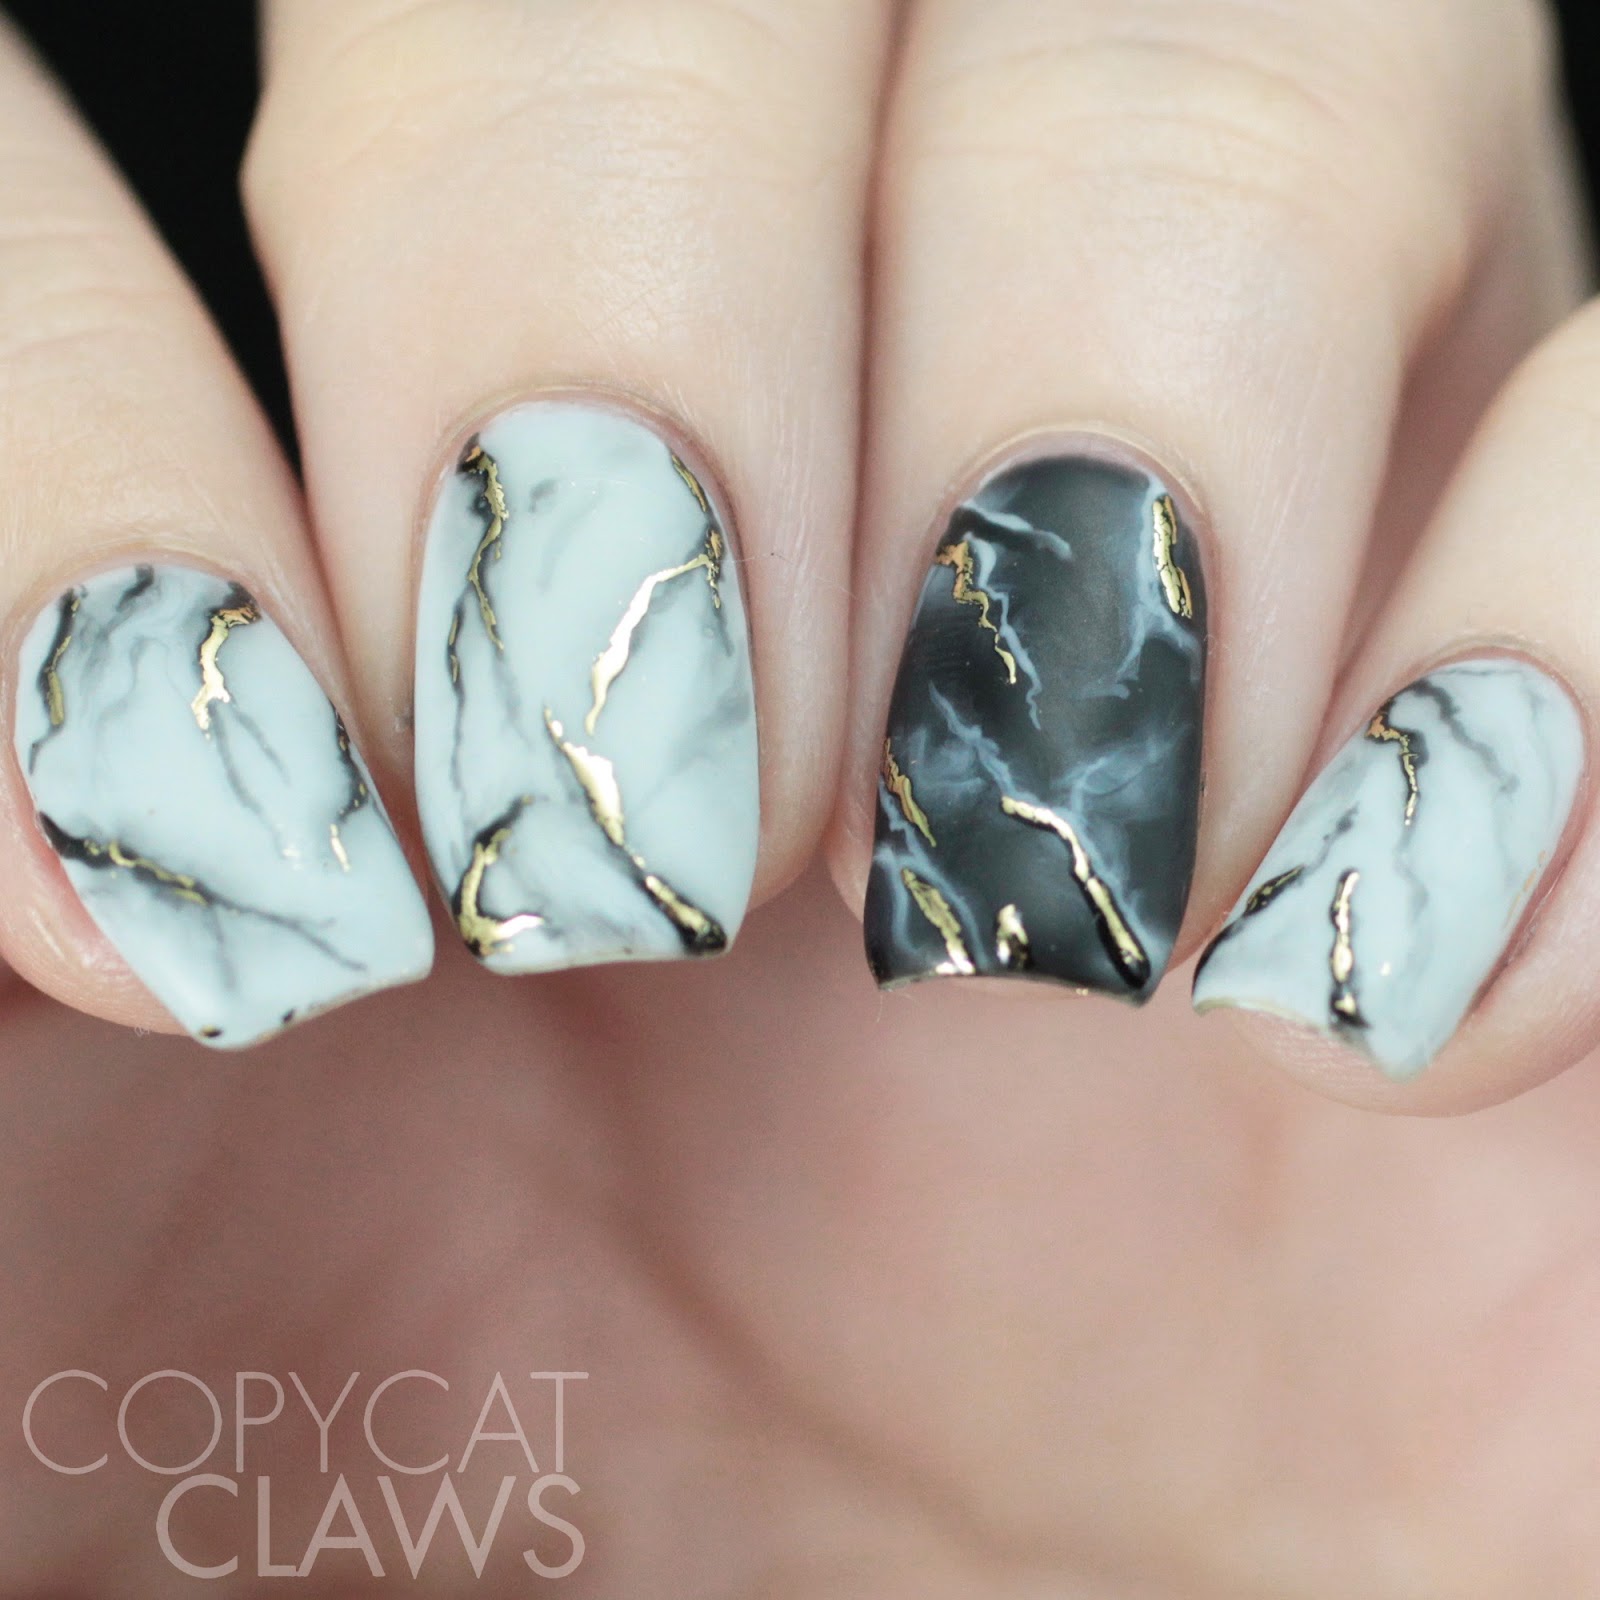 PiggieLuv: How NOT to do water marble nail art - HPB 'New to you' linkup